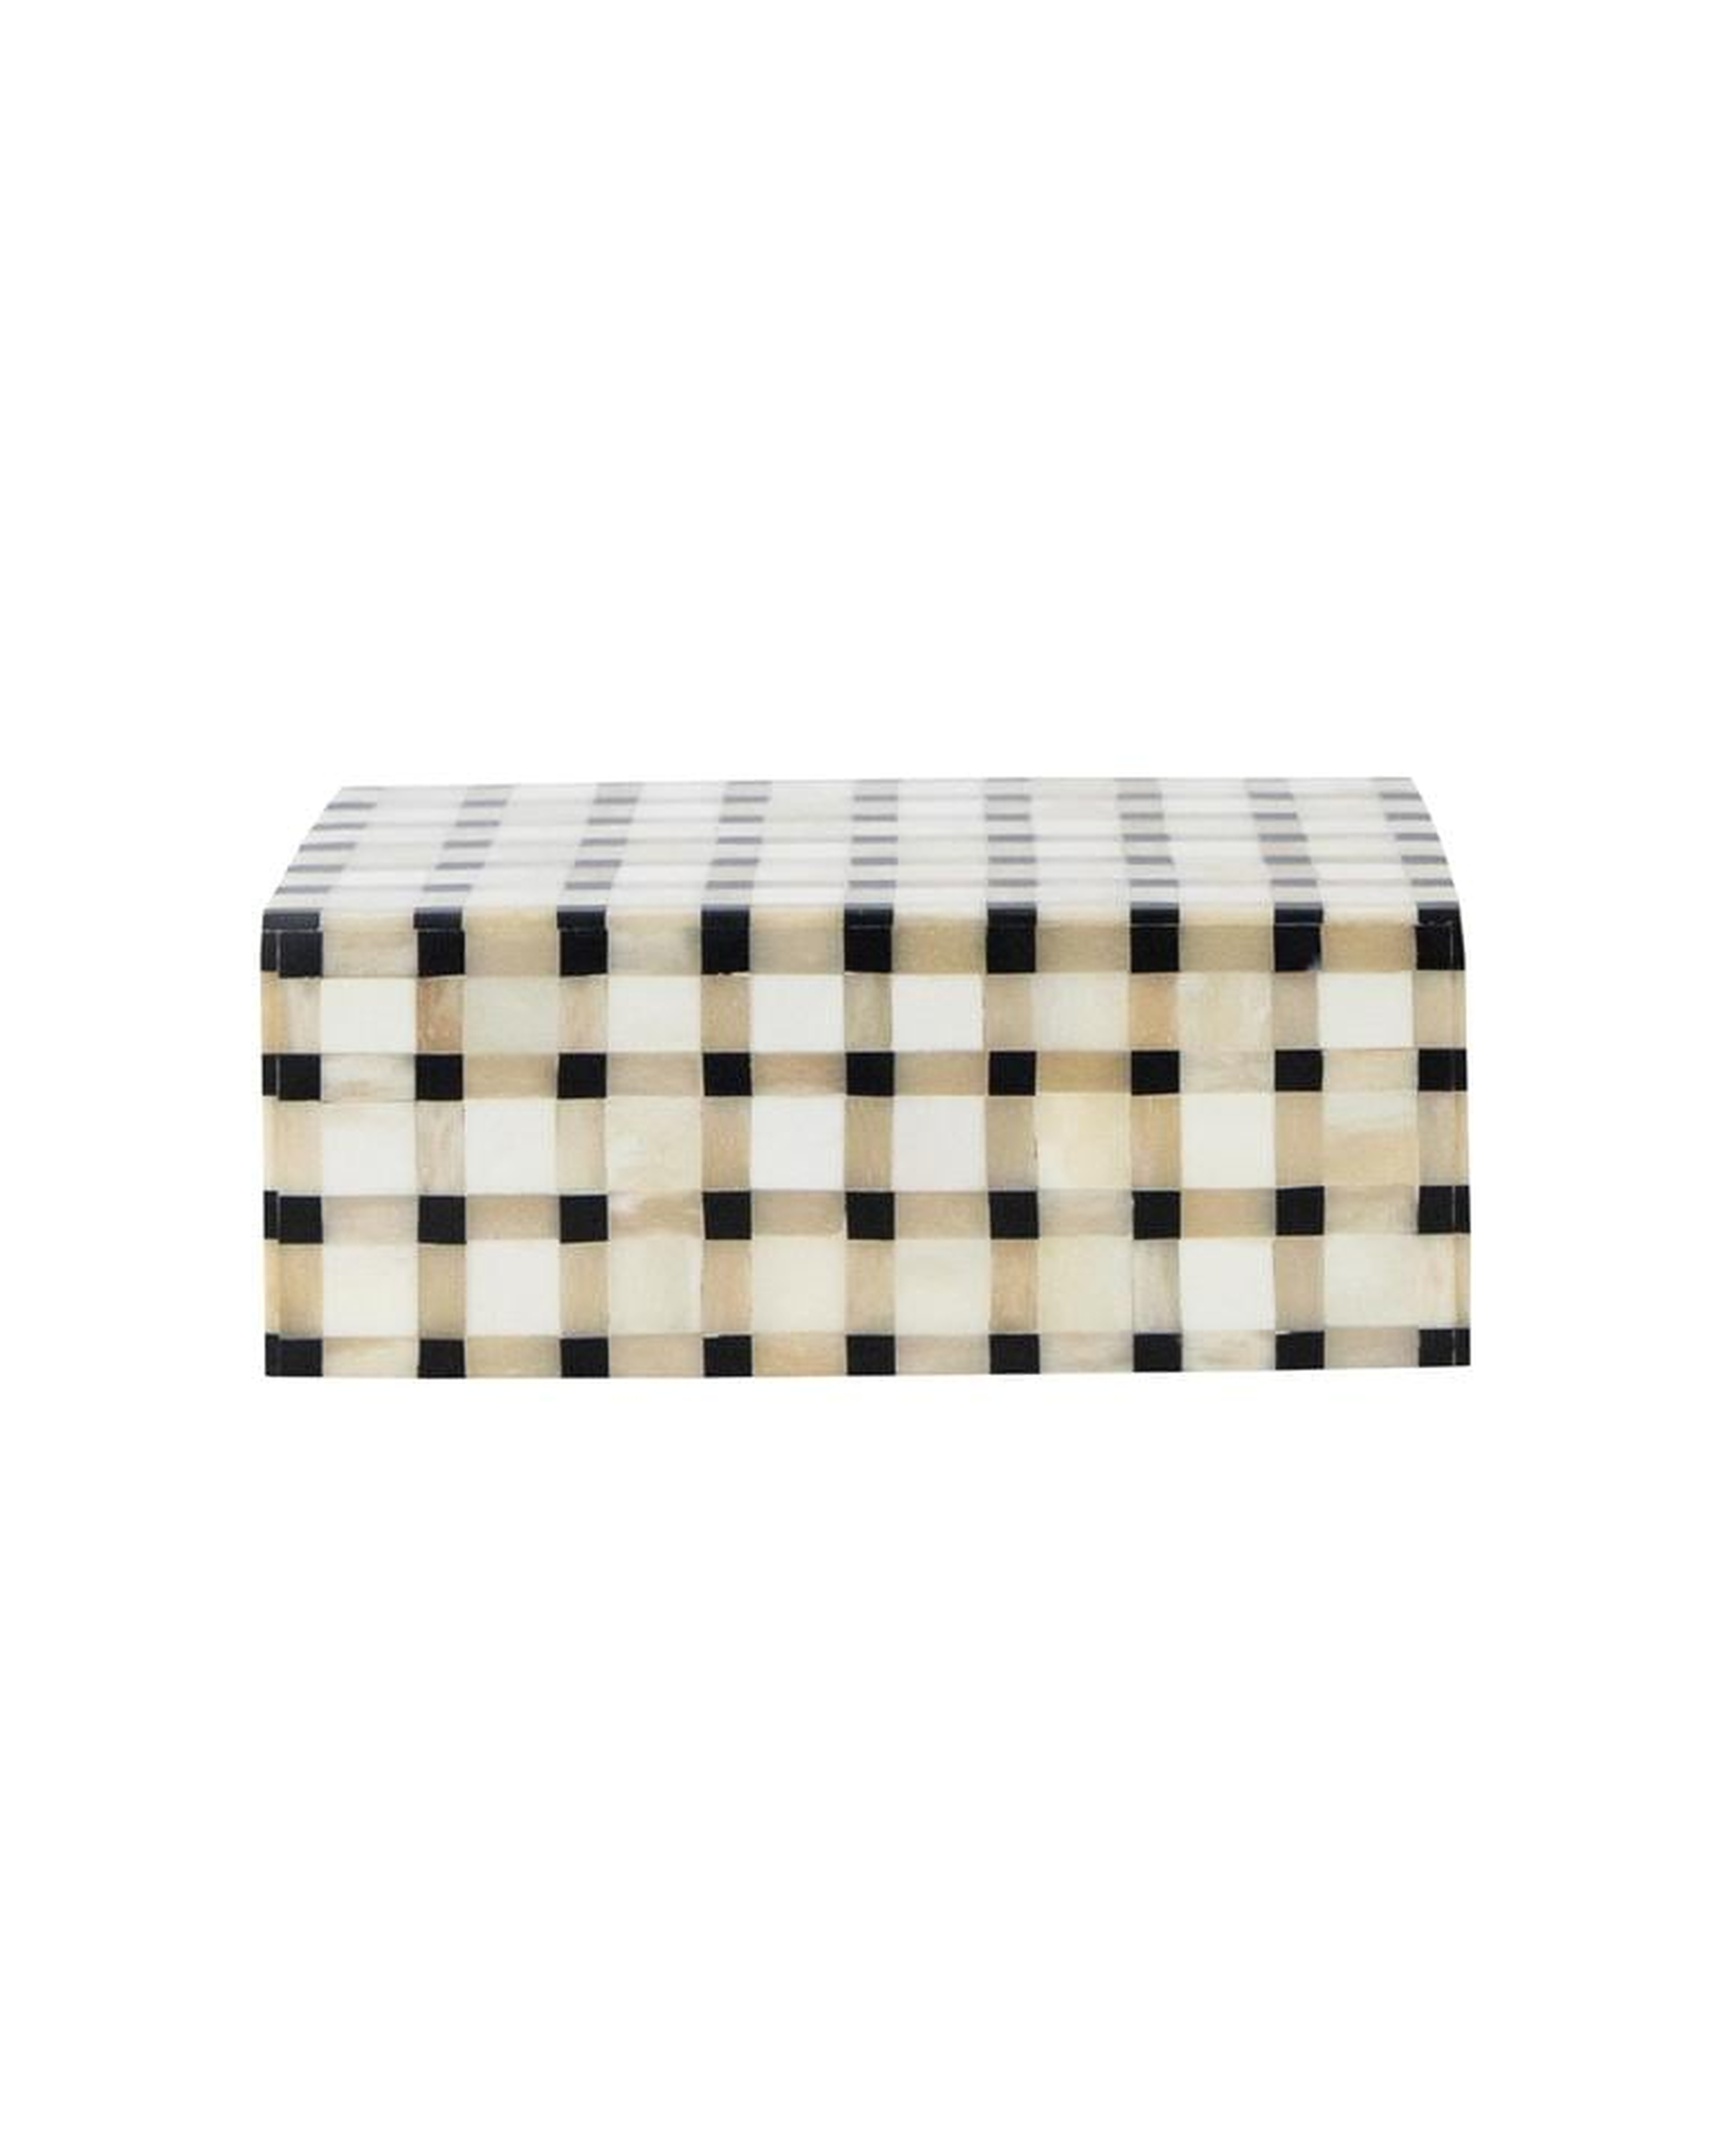 GRID PATTERNED BOX - McGee & Co.